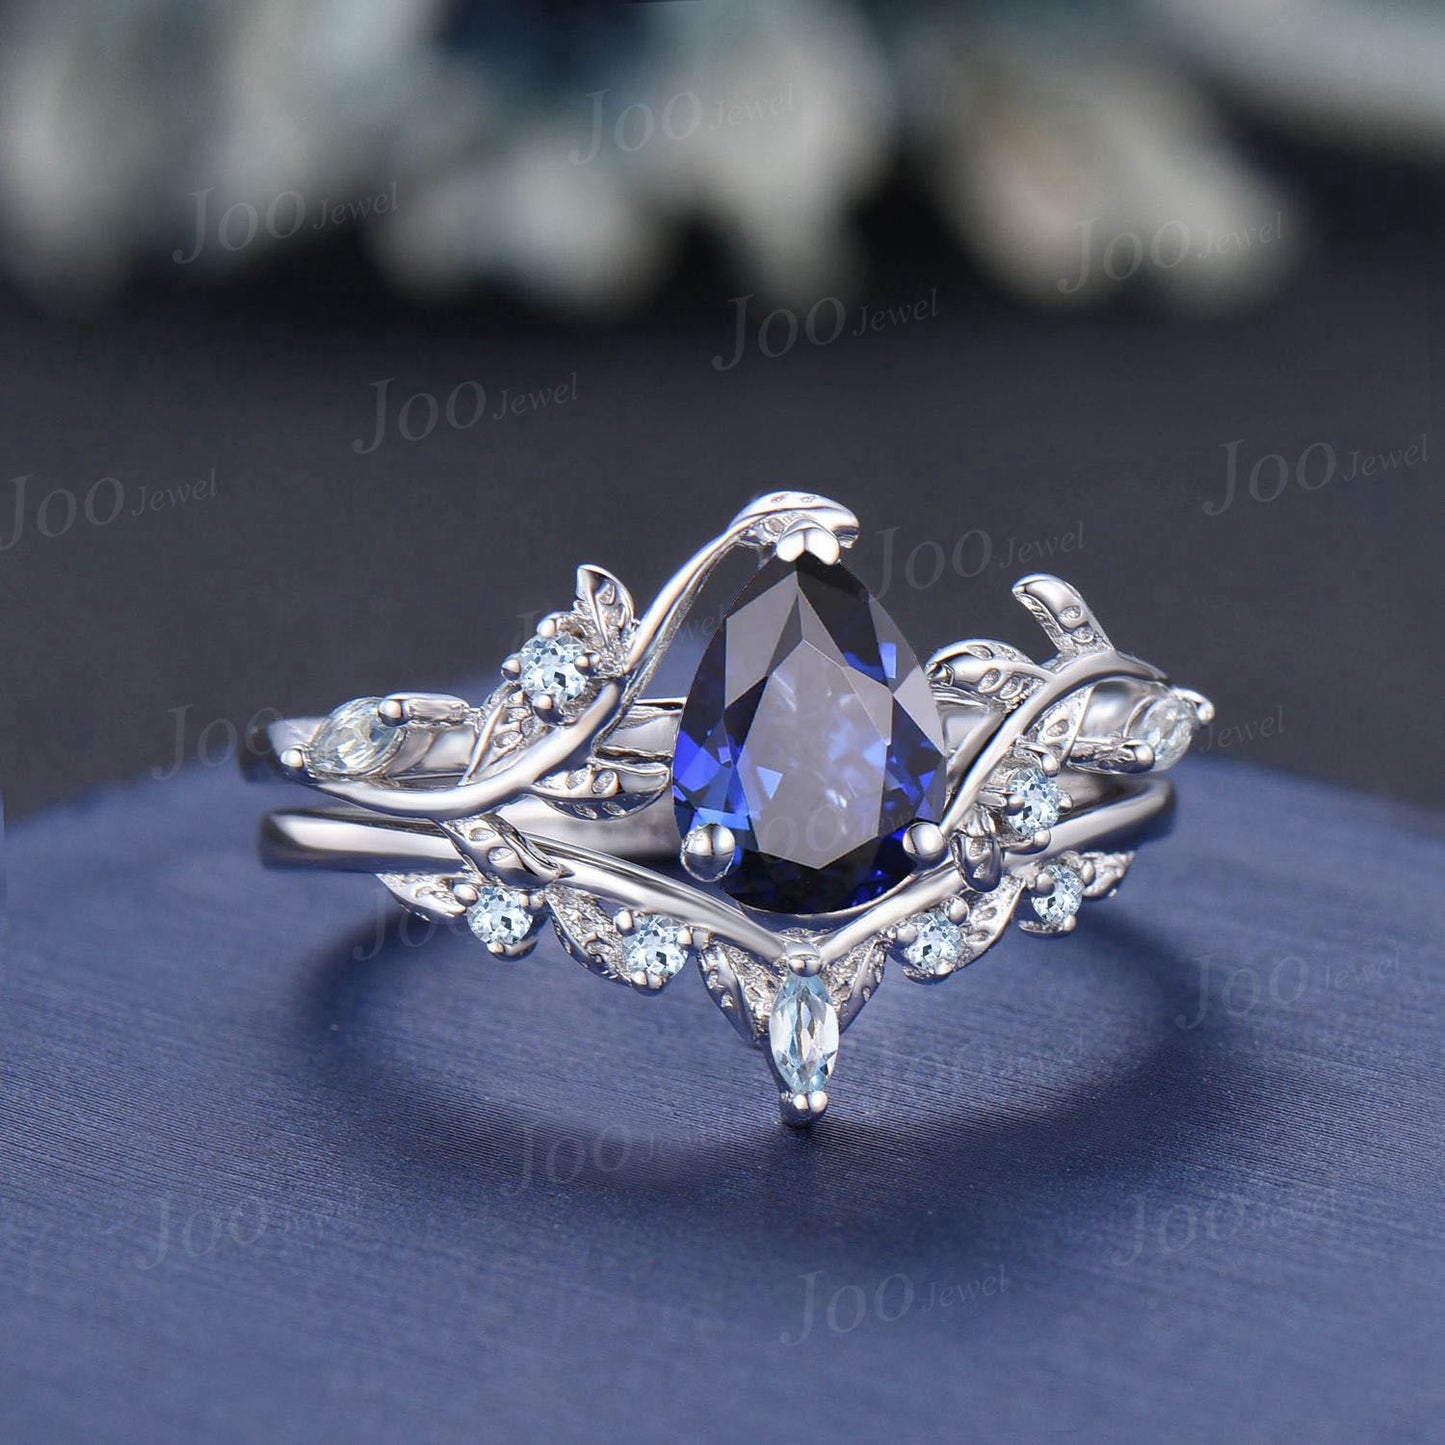 1.25ct Pear Cut Blue Sapphire Engagement Ring Set Leaf Branch Nature Inspired Real Aquamarine Wedding Ring for Women September Jewelry Gifts